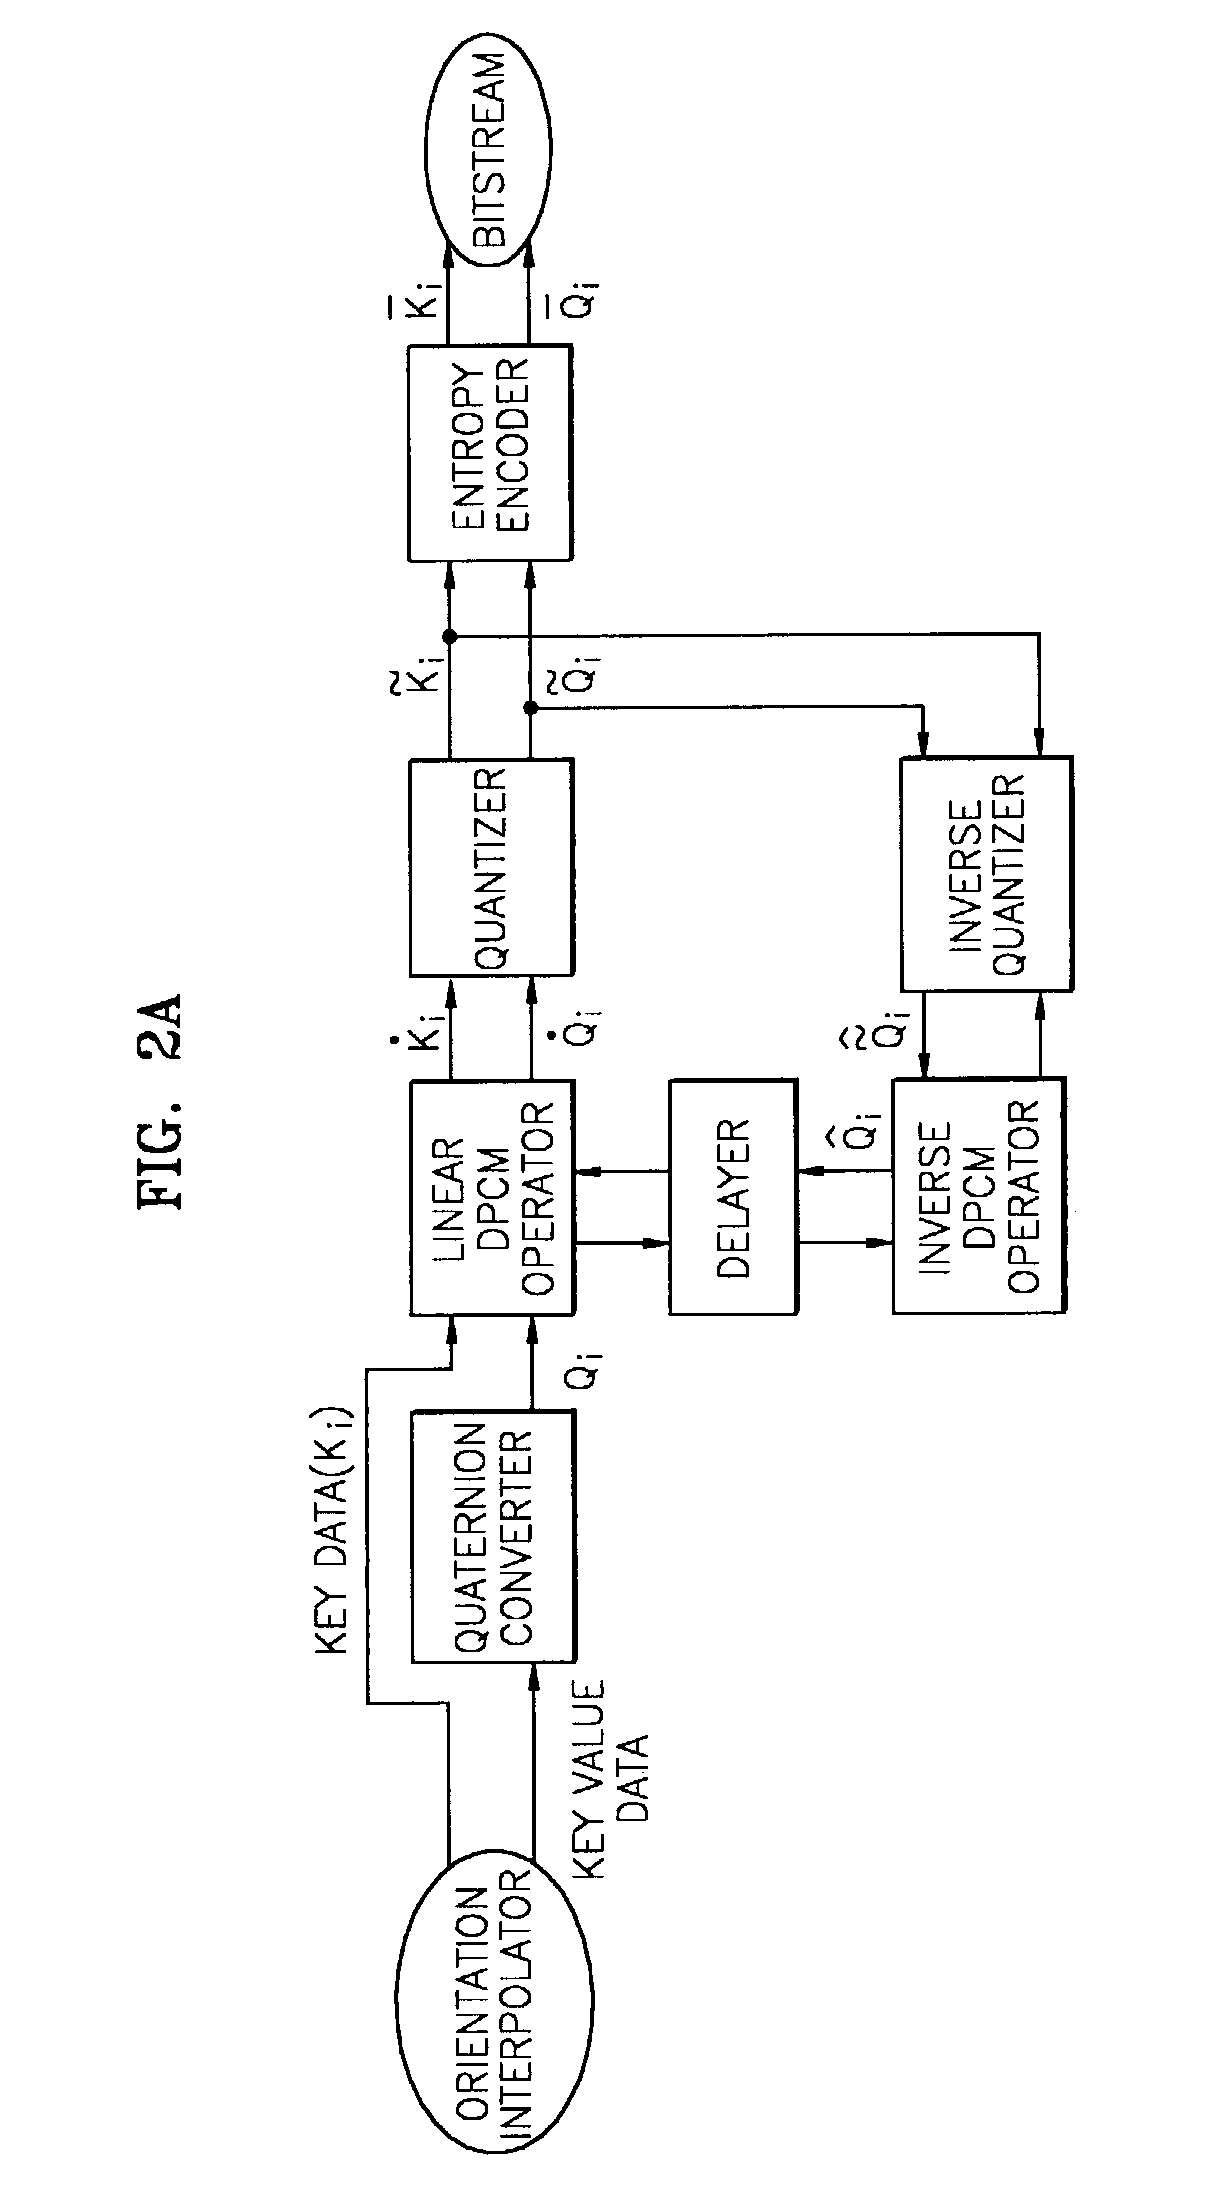 Method and apparatus for encoding and decoding an orientation interpolator